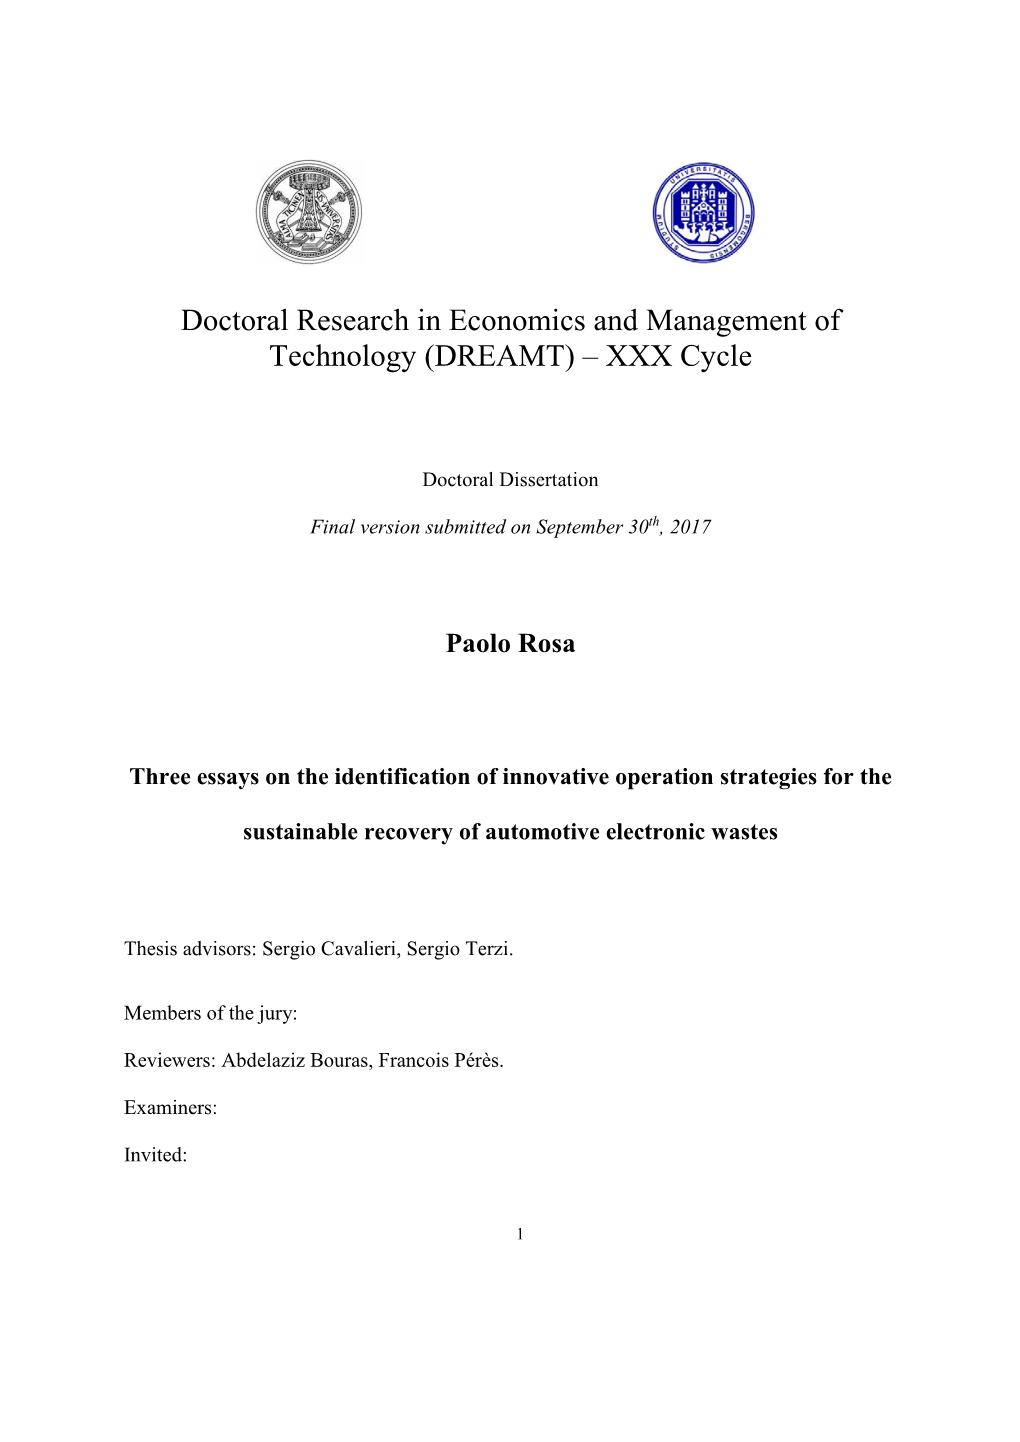 Doctoral Research in Economics and Management of Technology (DREAMT) – XXX Cycle